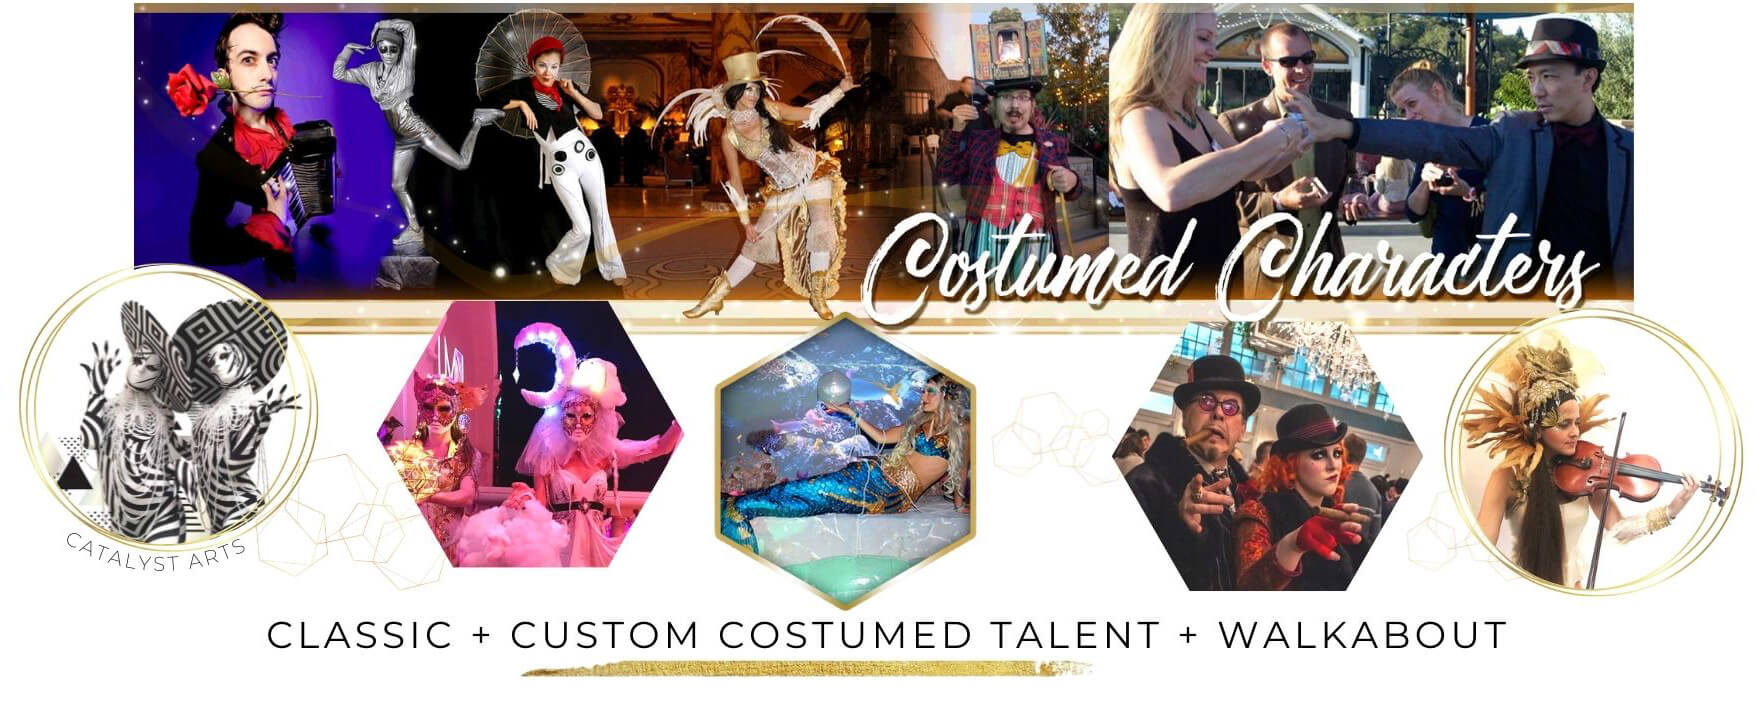 Costumed Character Strolling Performer booking in California with Catalyst Arts